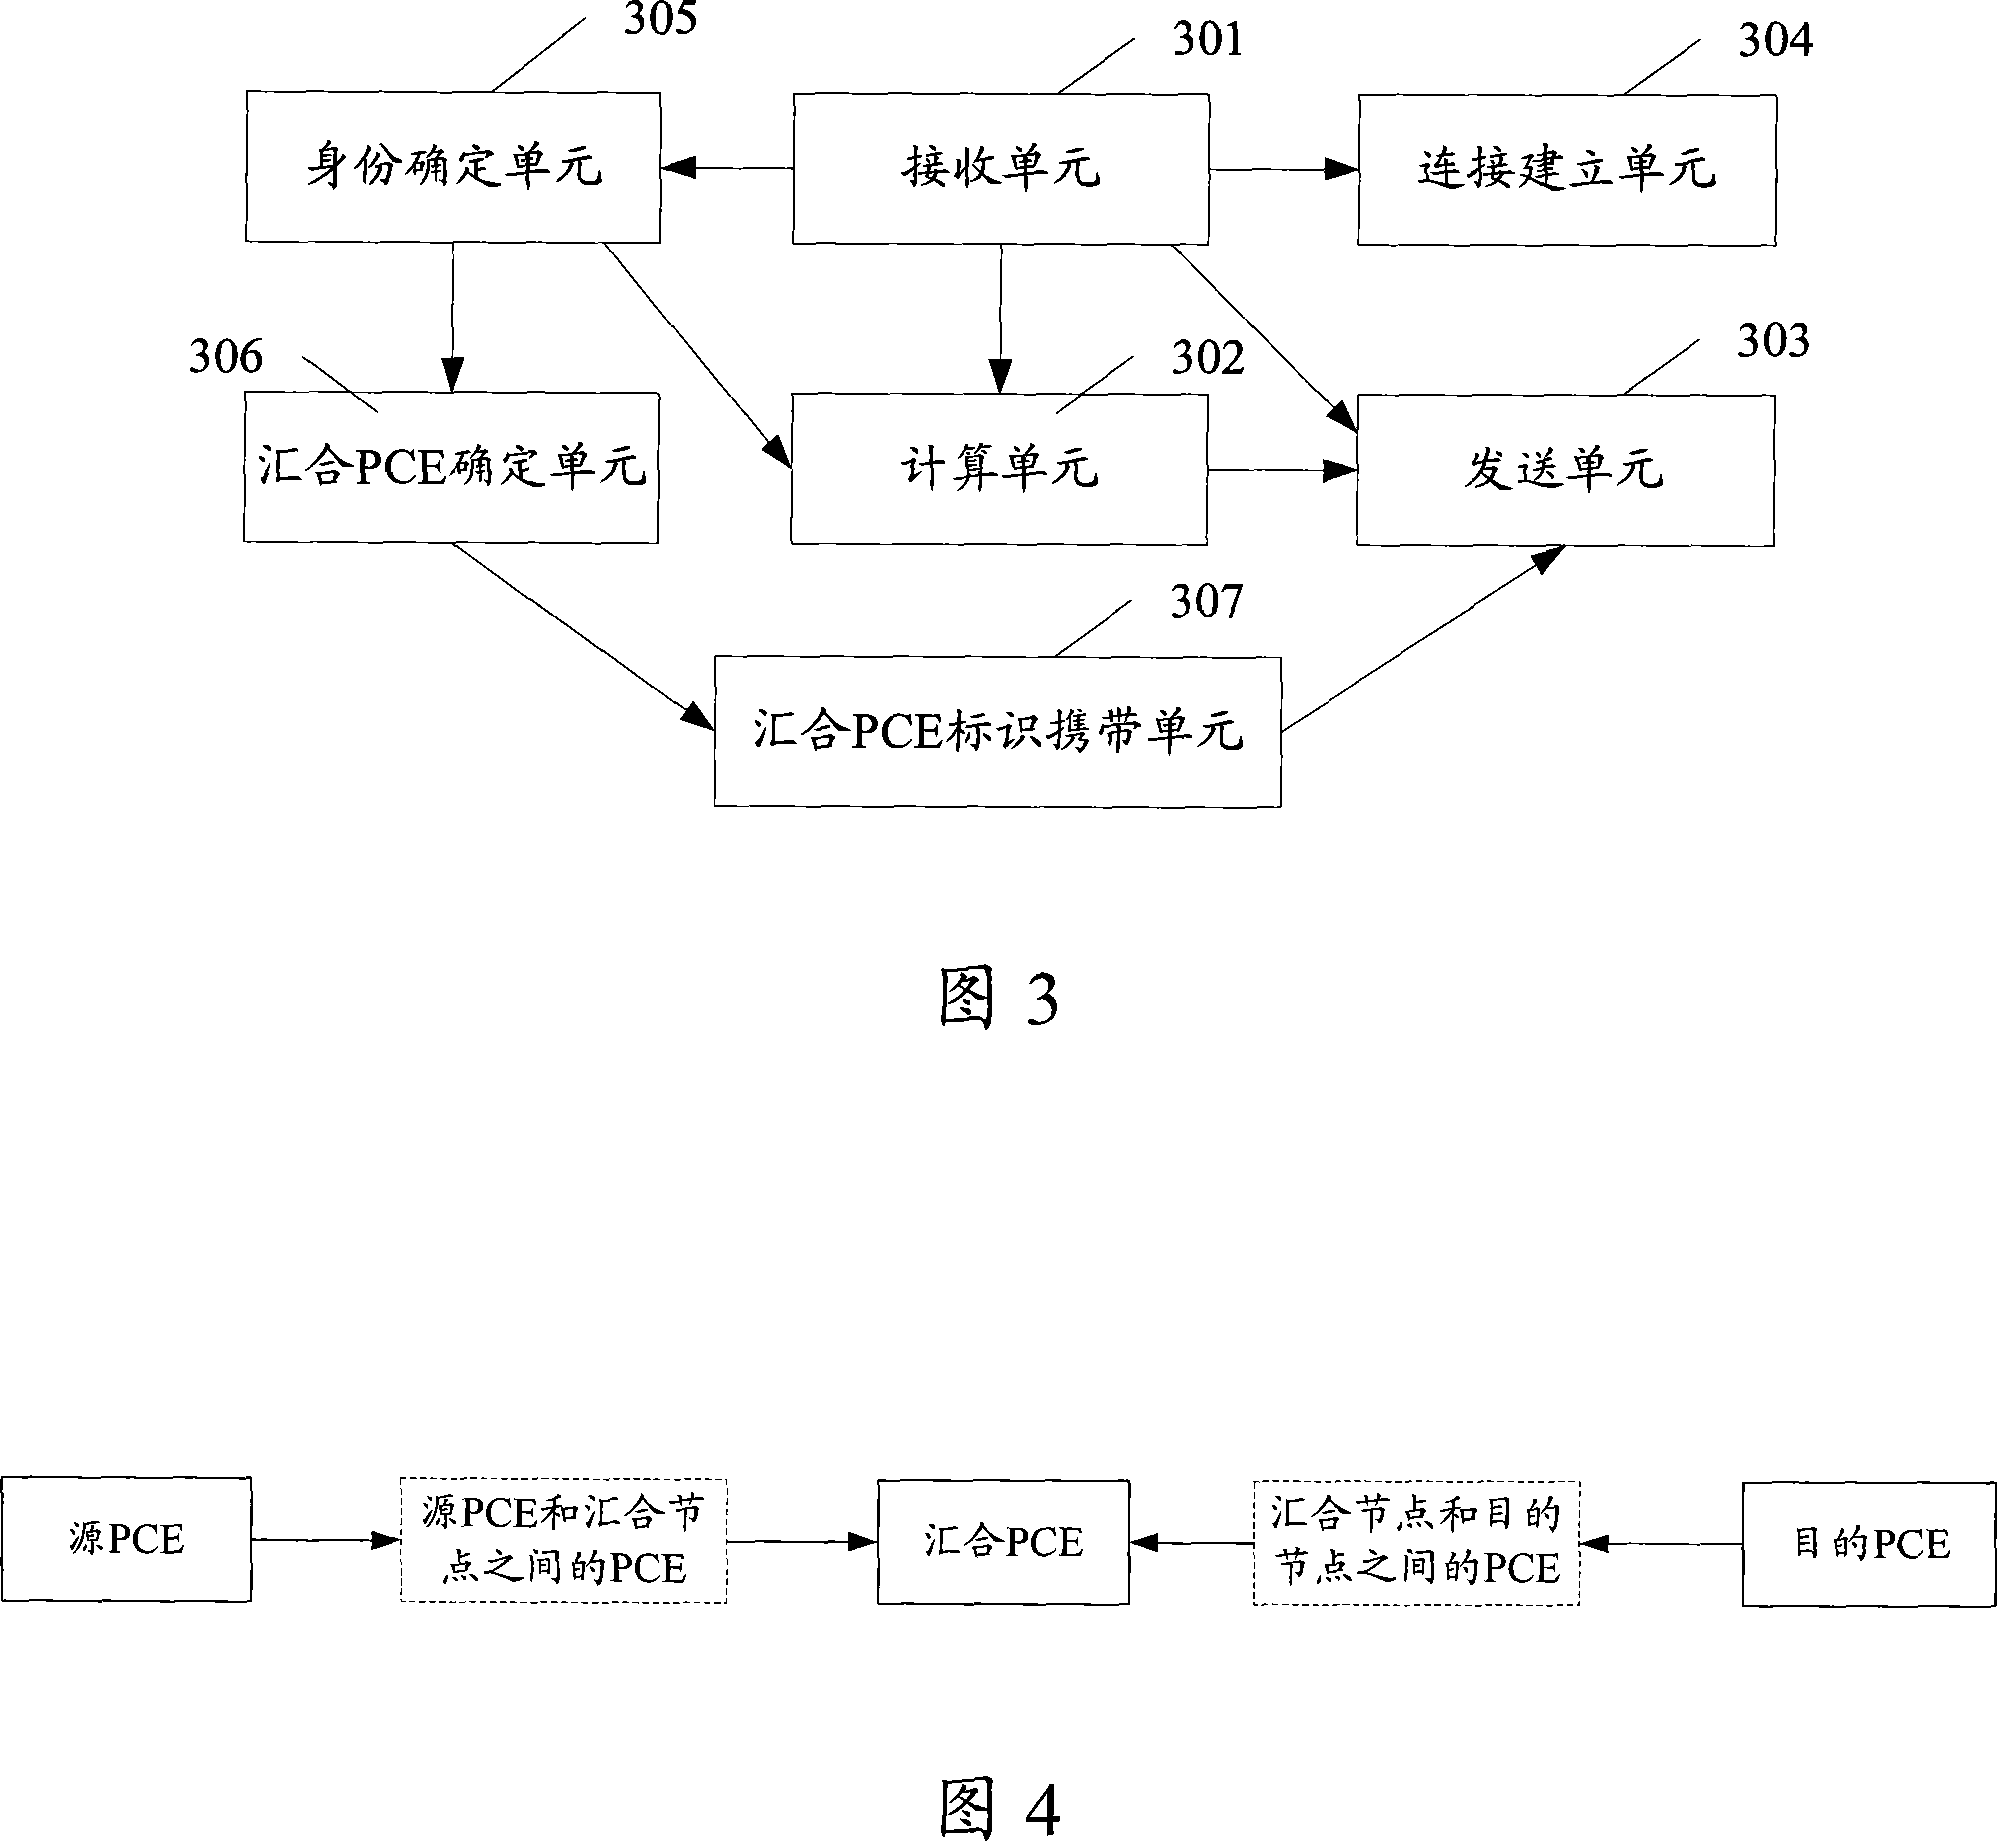 Method of obtaining path information and path computing node